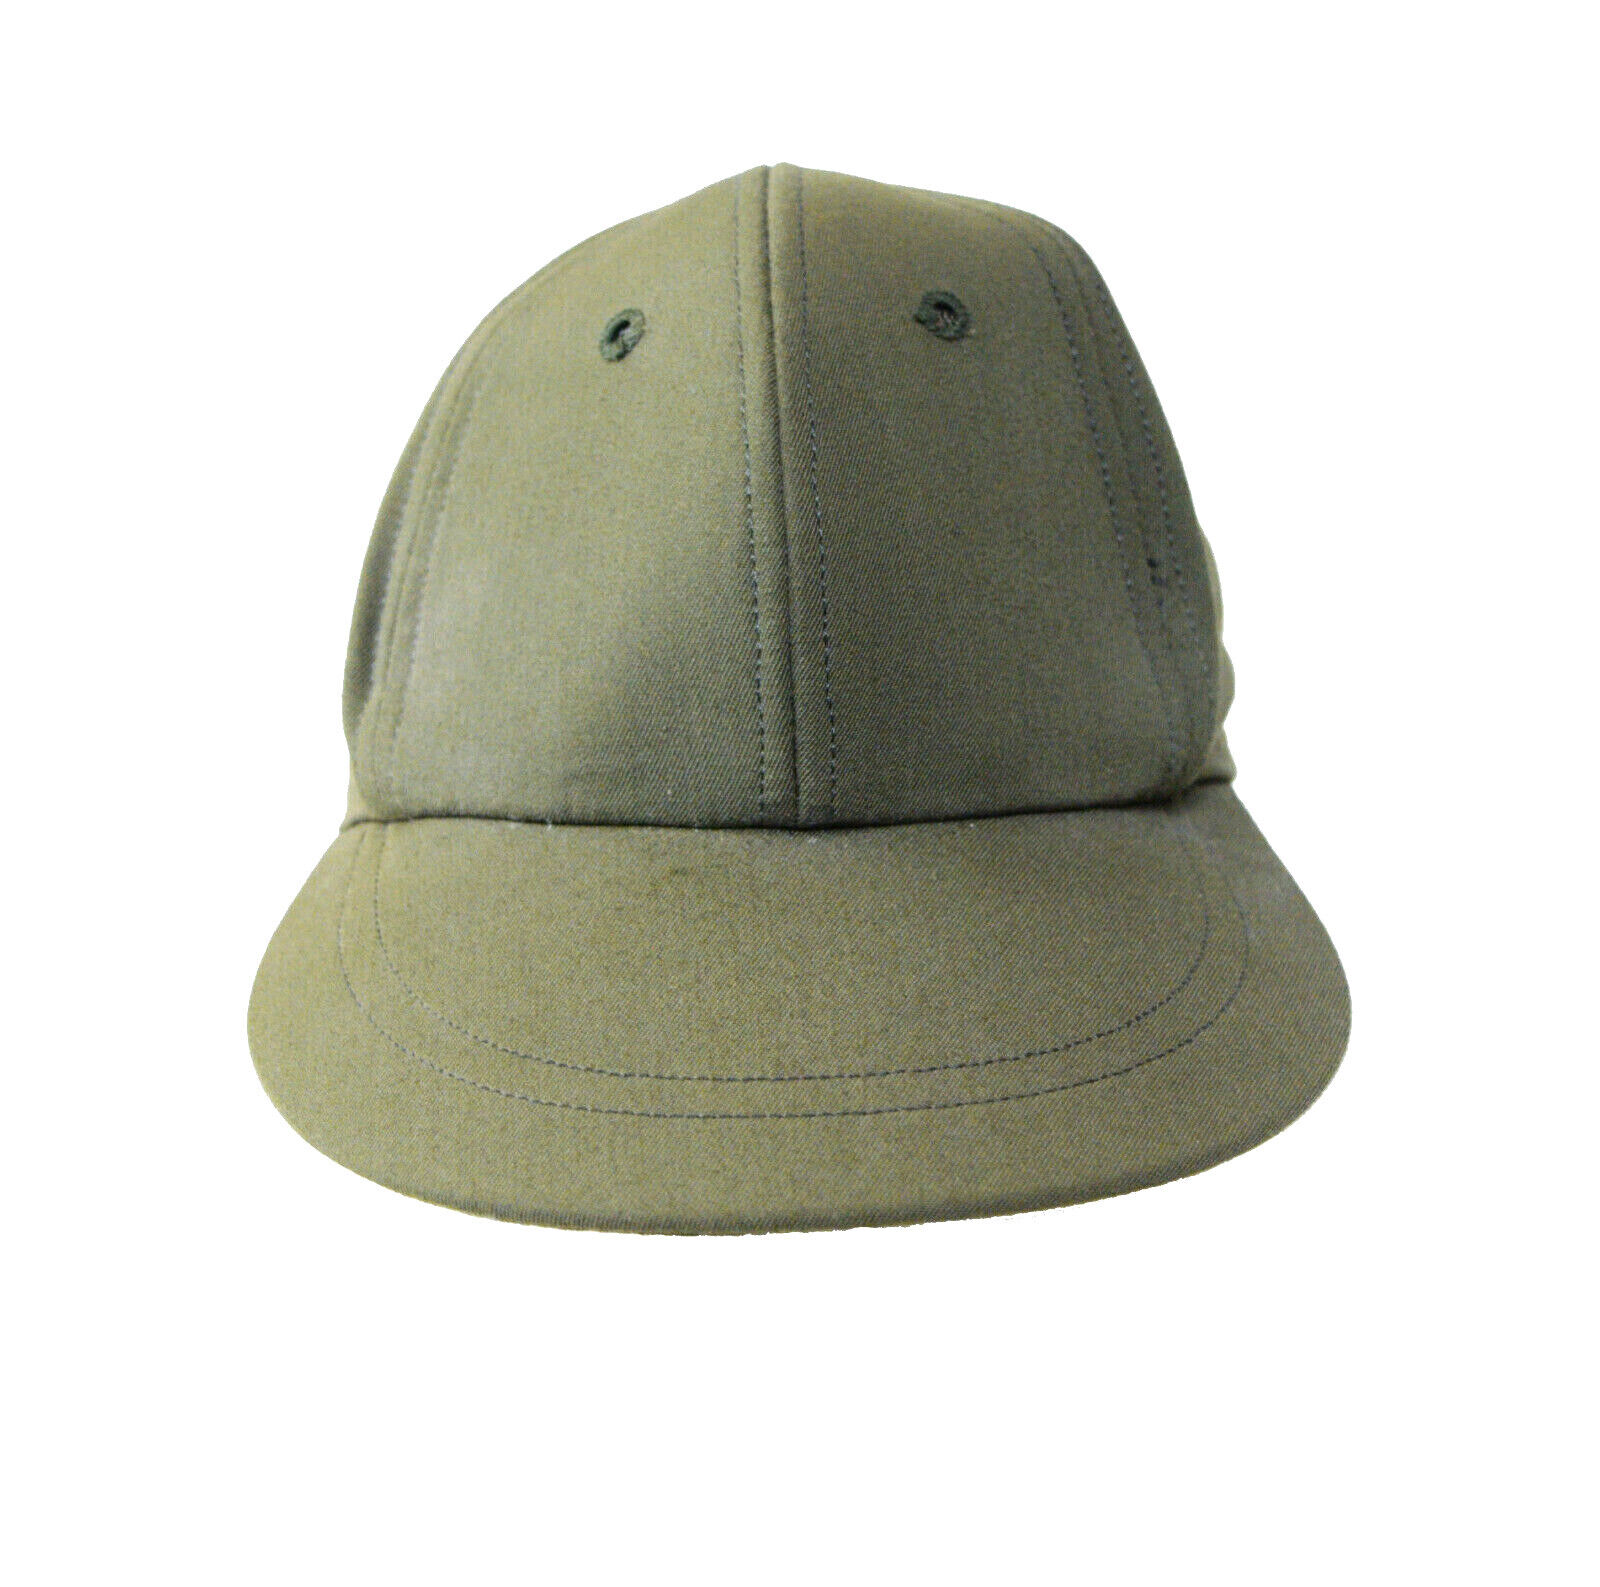 Vietnam 1967 Dated US Army OG-106 Cap Field Hot Weather 6-5/8 Baseball Hat